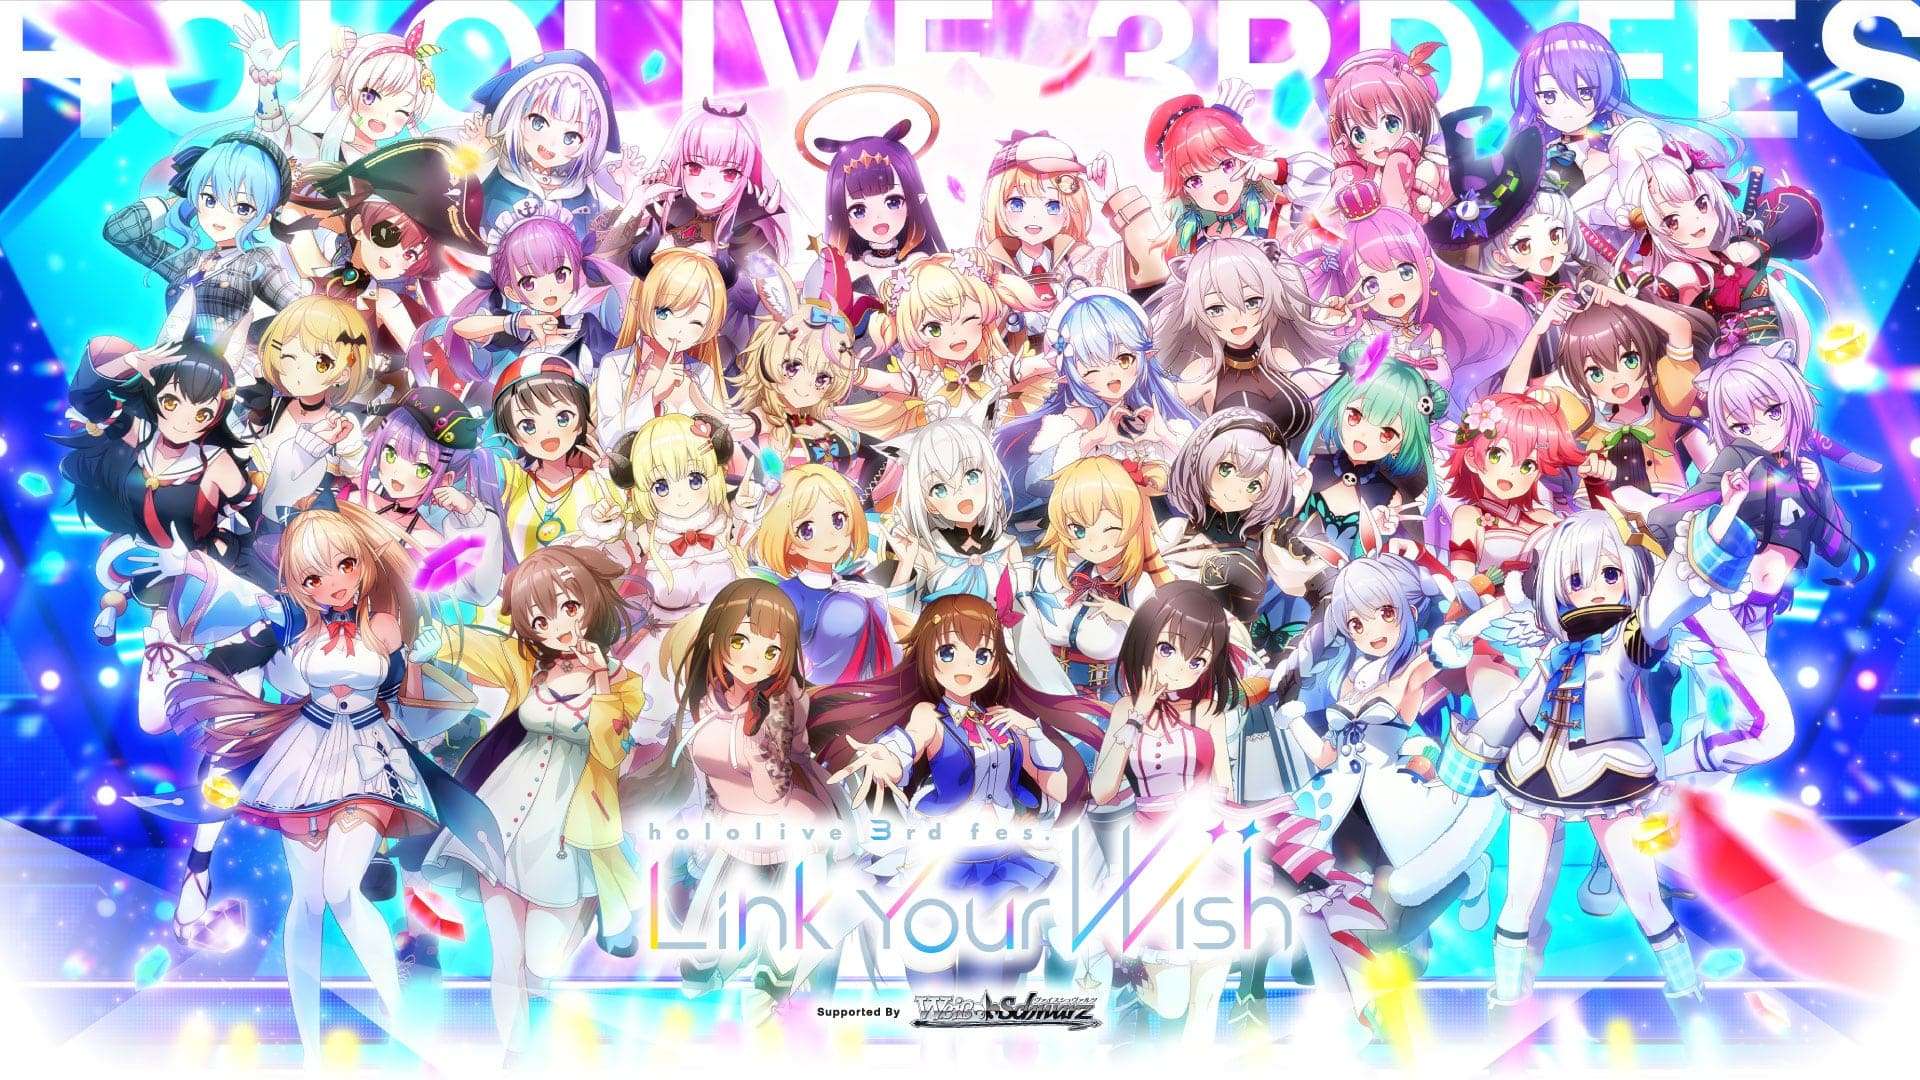 Hololive Holofes 2022 promo art for Link Your Wish concert